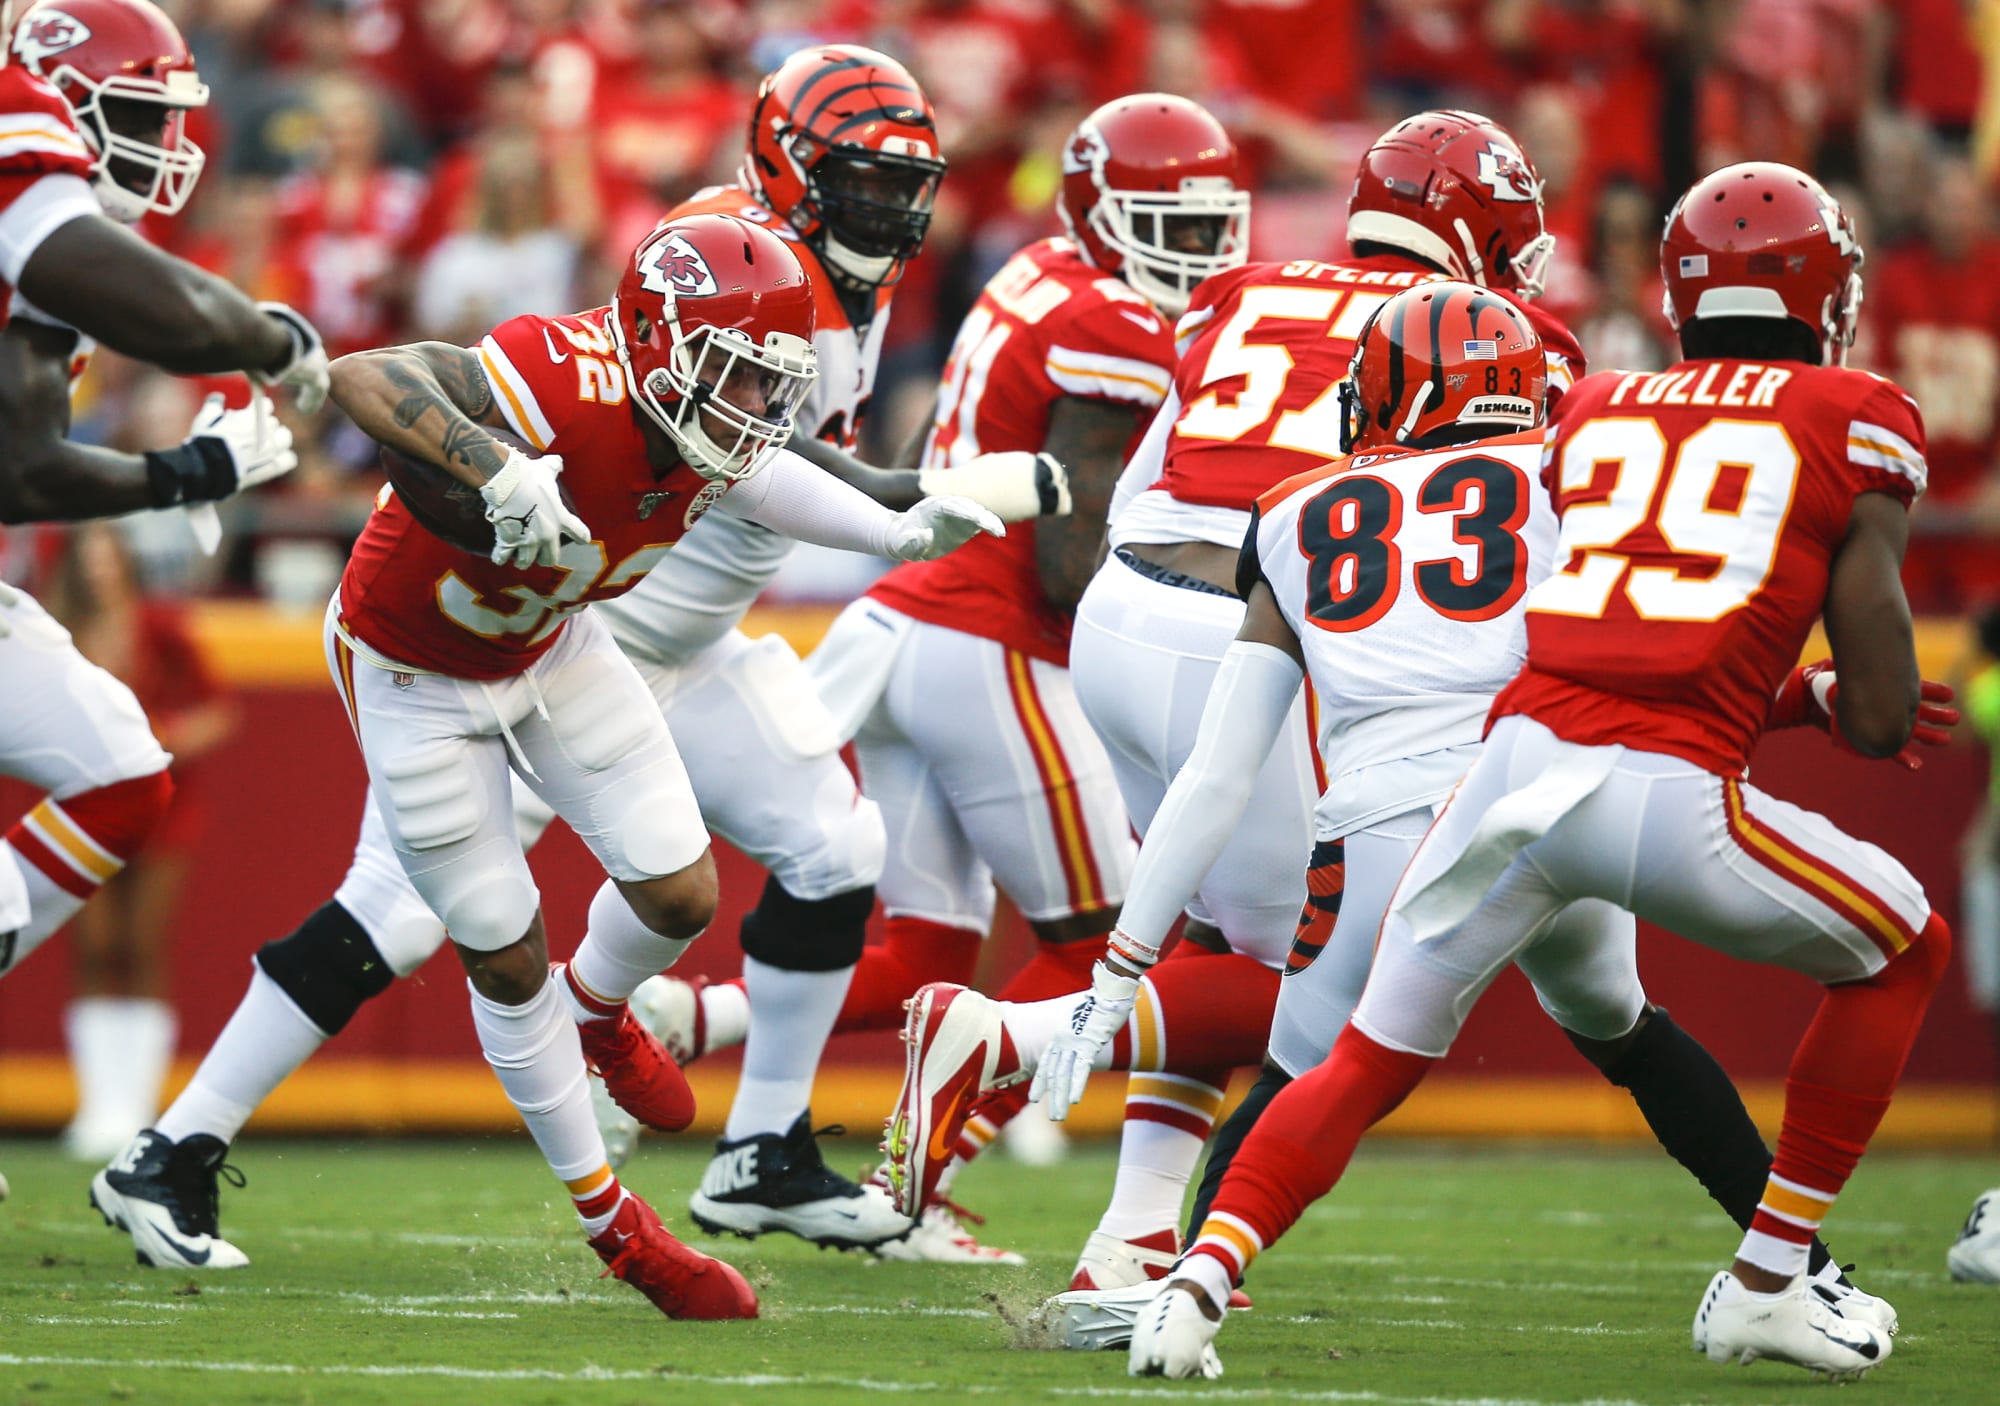 Chiefs vs Bengals final score predictions and preview